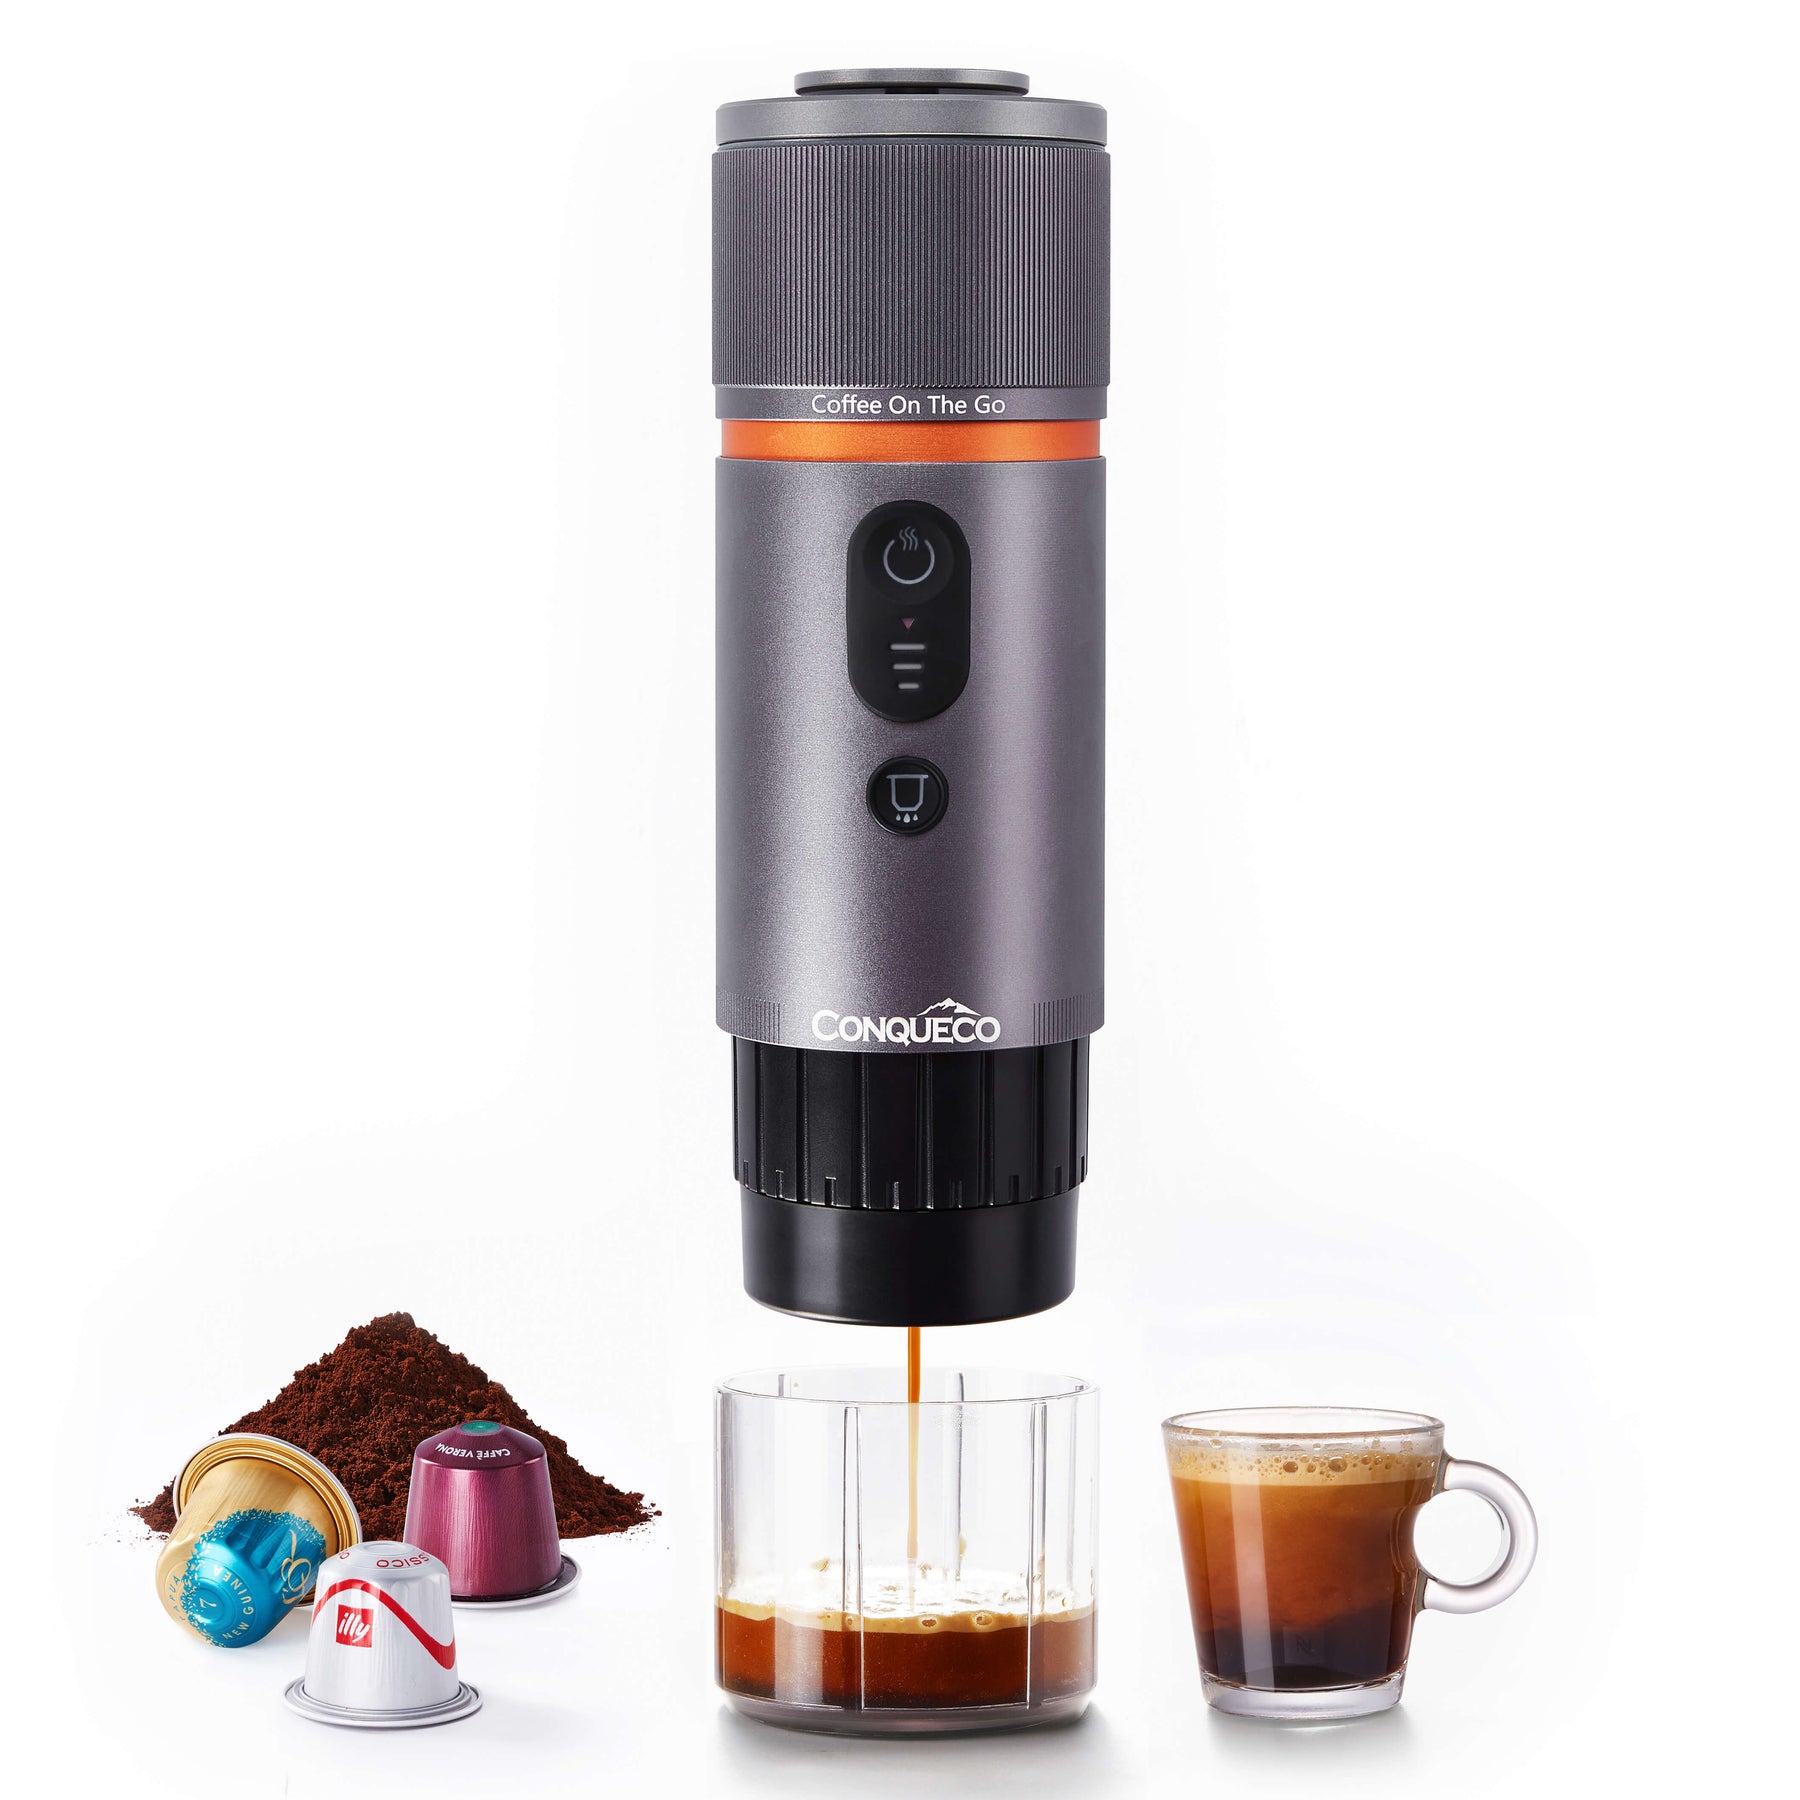 Gadgelux Portable Espresso Machine, Upgraded v2, Compatible with NS Capsule & Ground Coffee, Rechargeable Car Coffee Maker, Self-heating, Travel